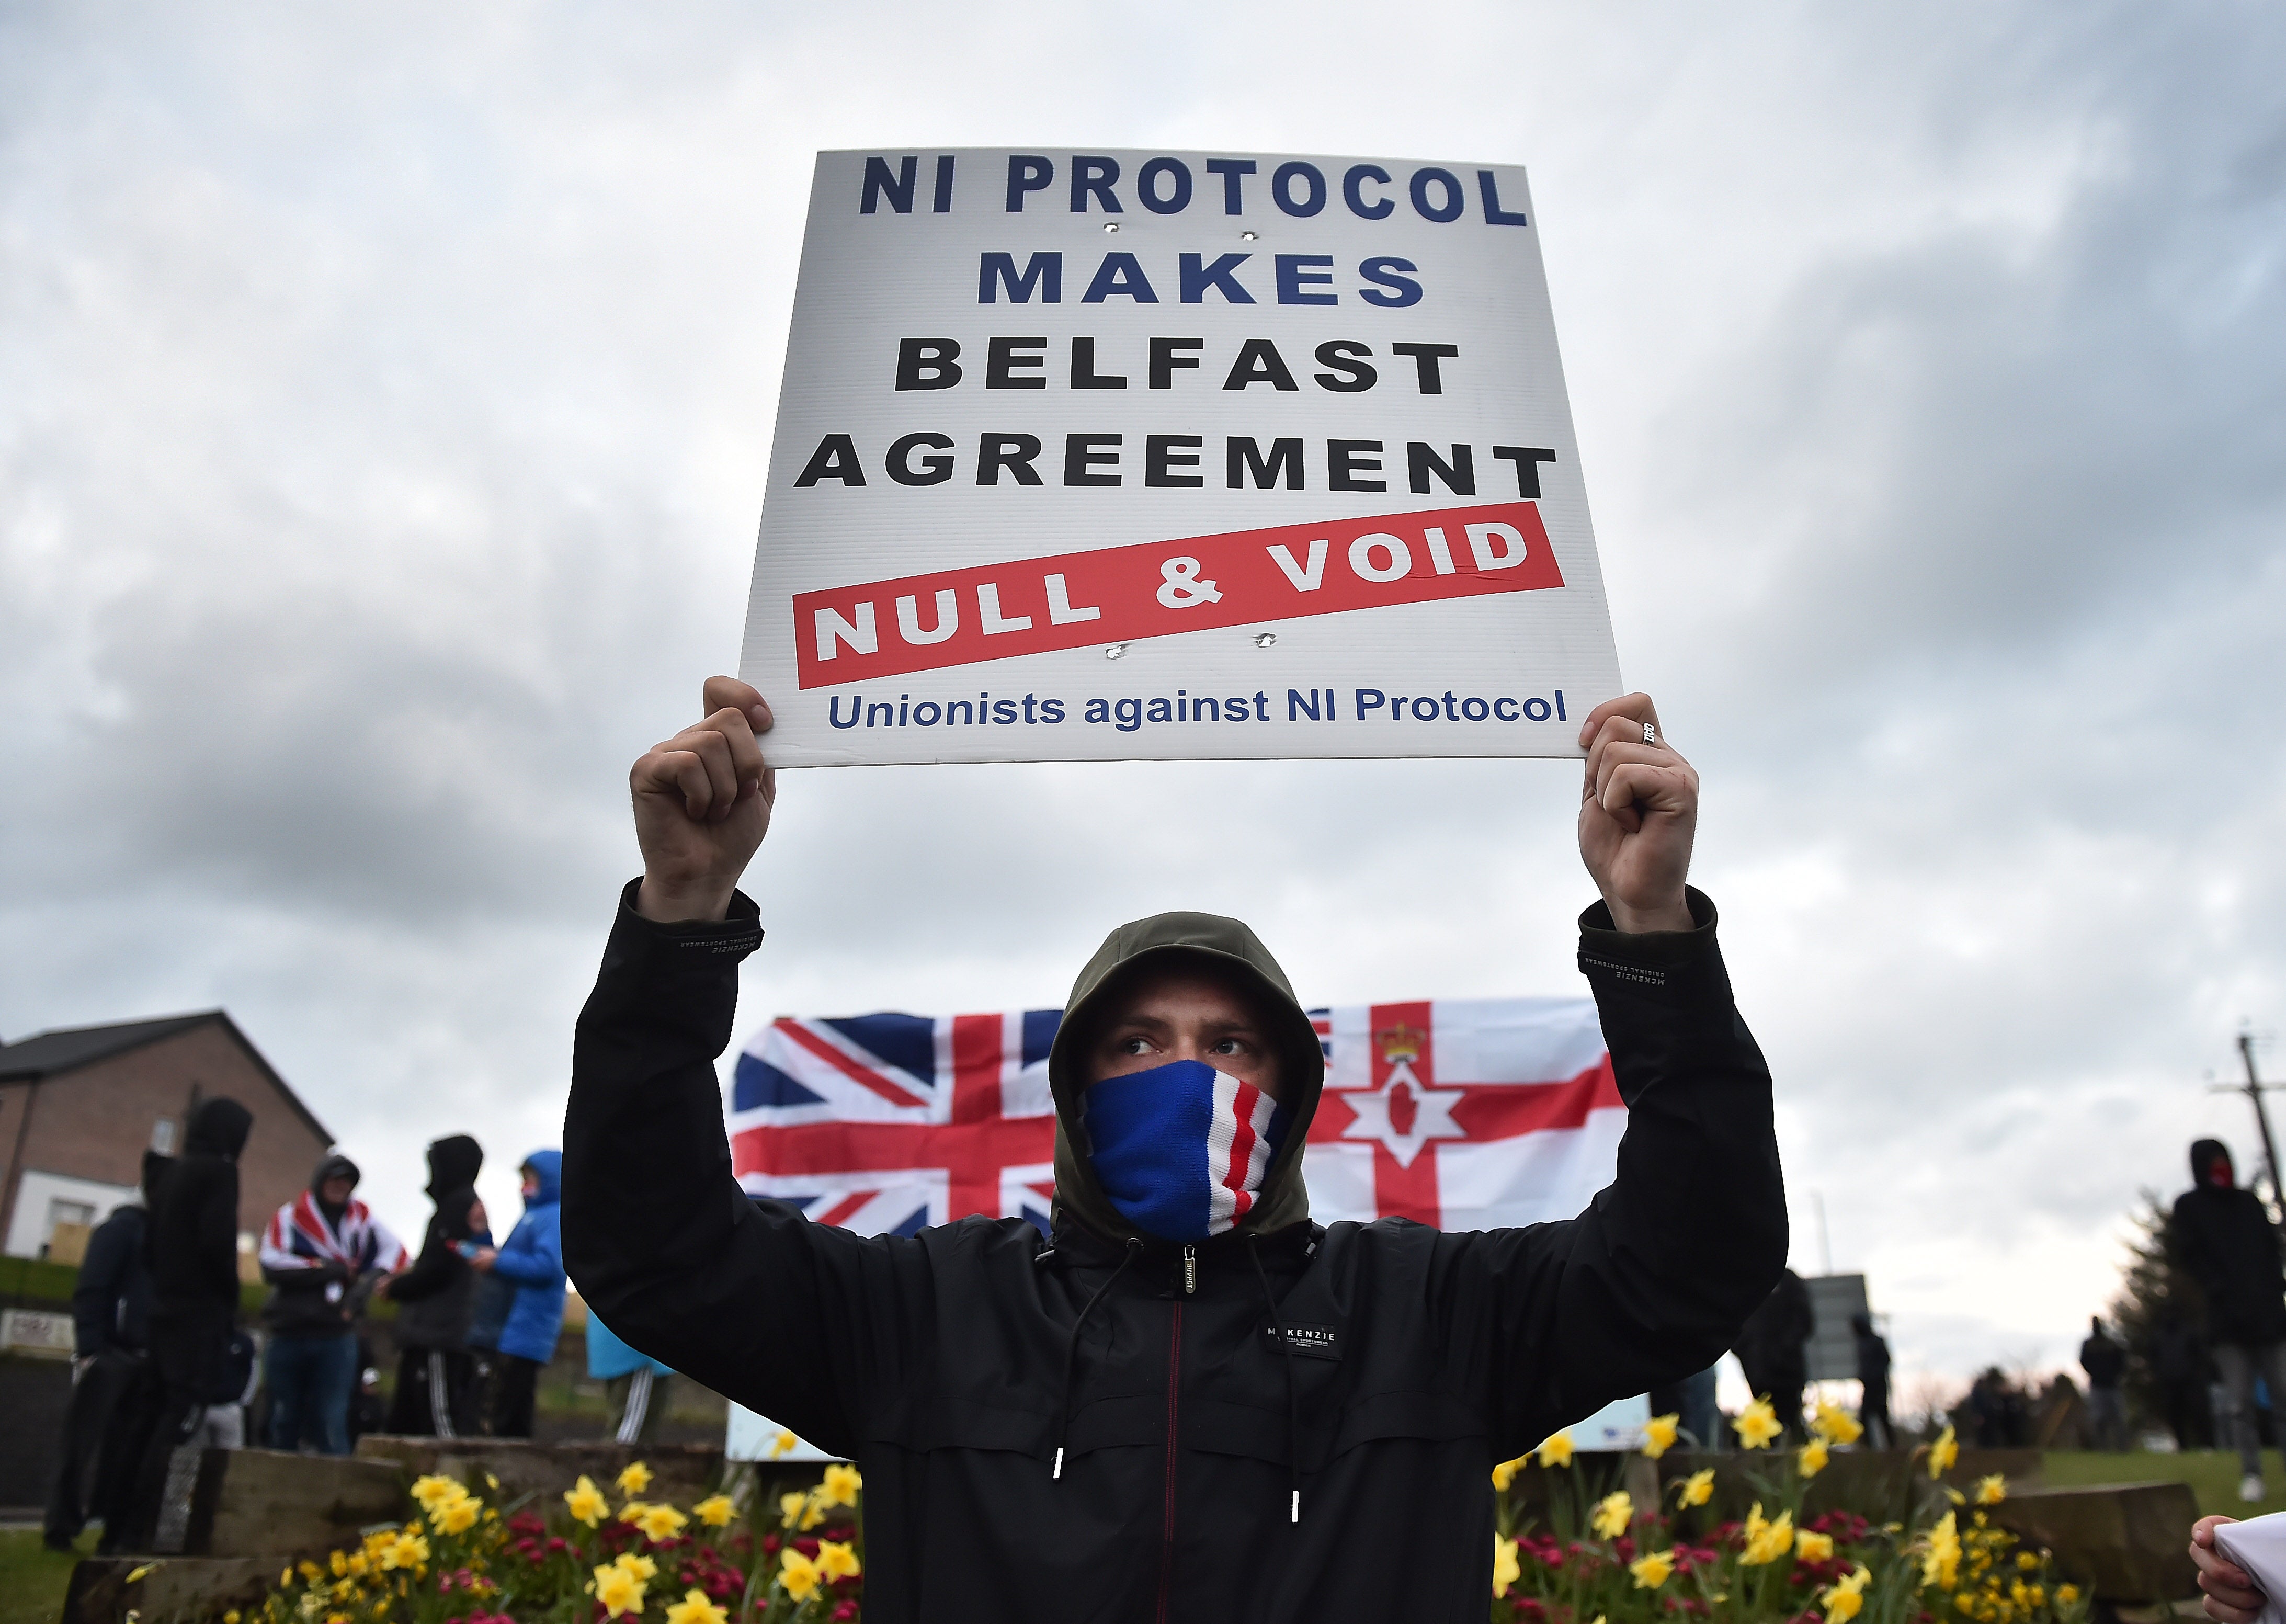 The DUP, like many in Northern Ireland, finds the protocol intolerable